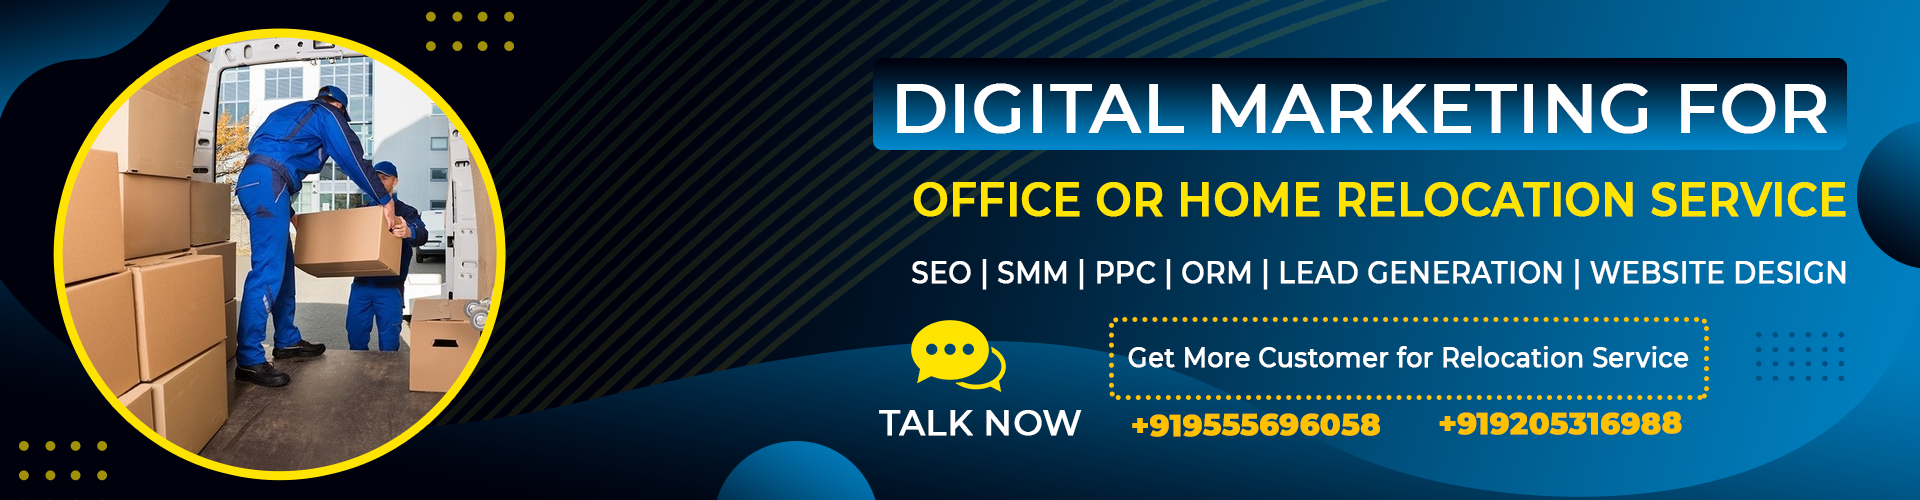 digital-marketing-for-office-or-home-relocation-service